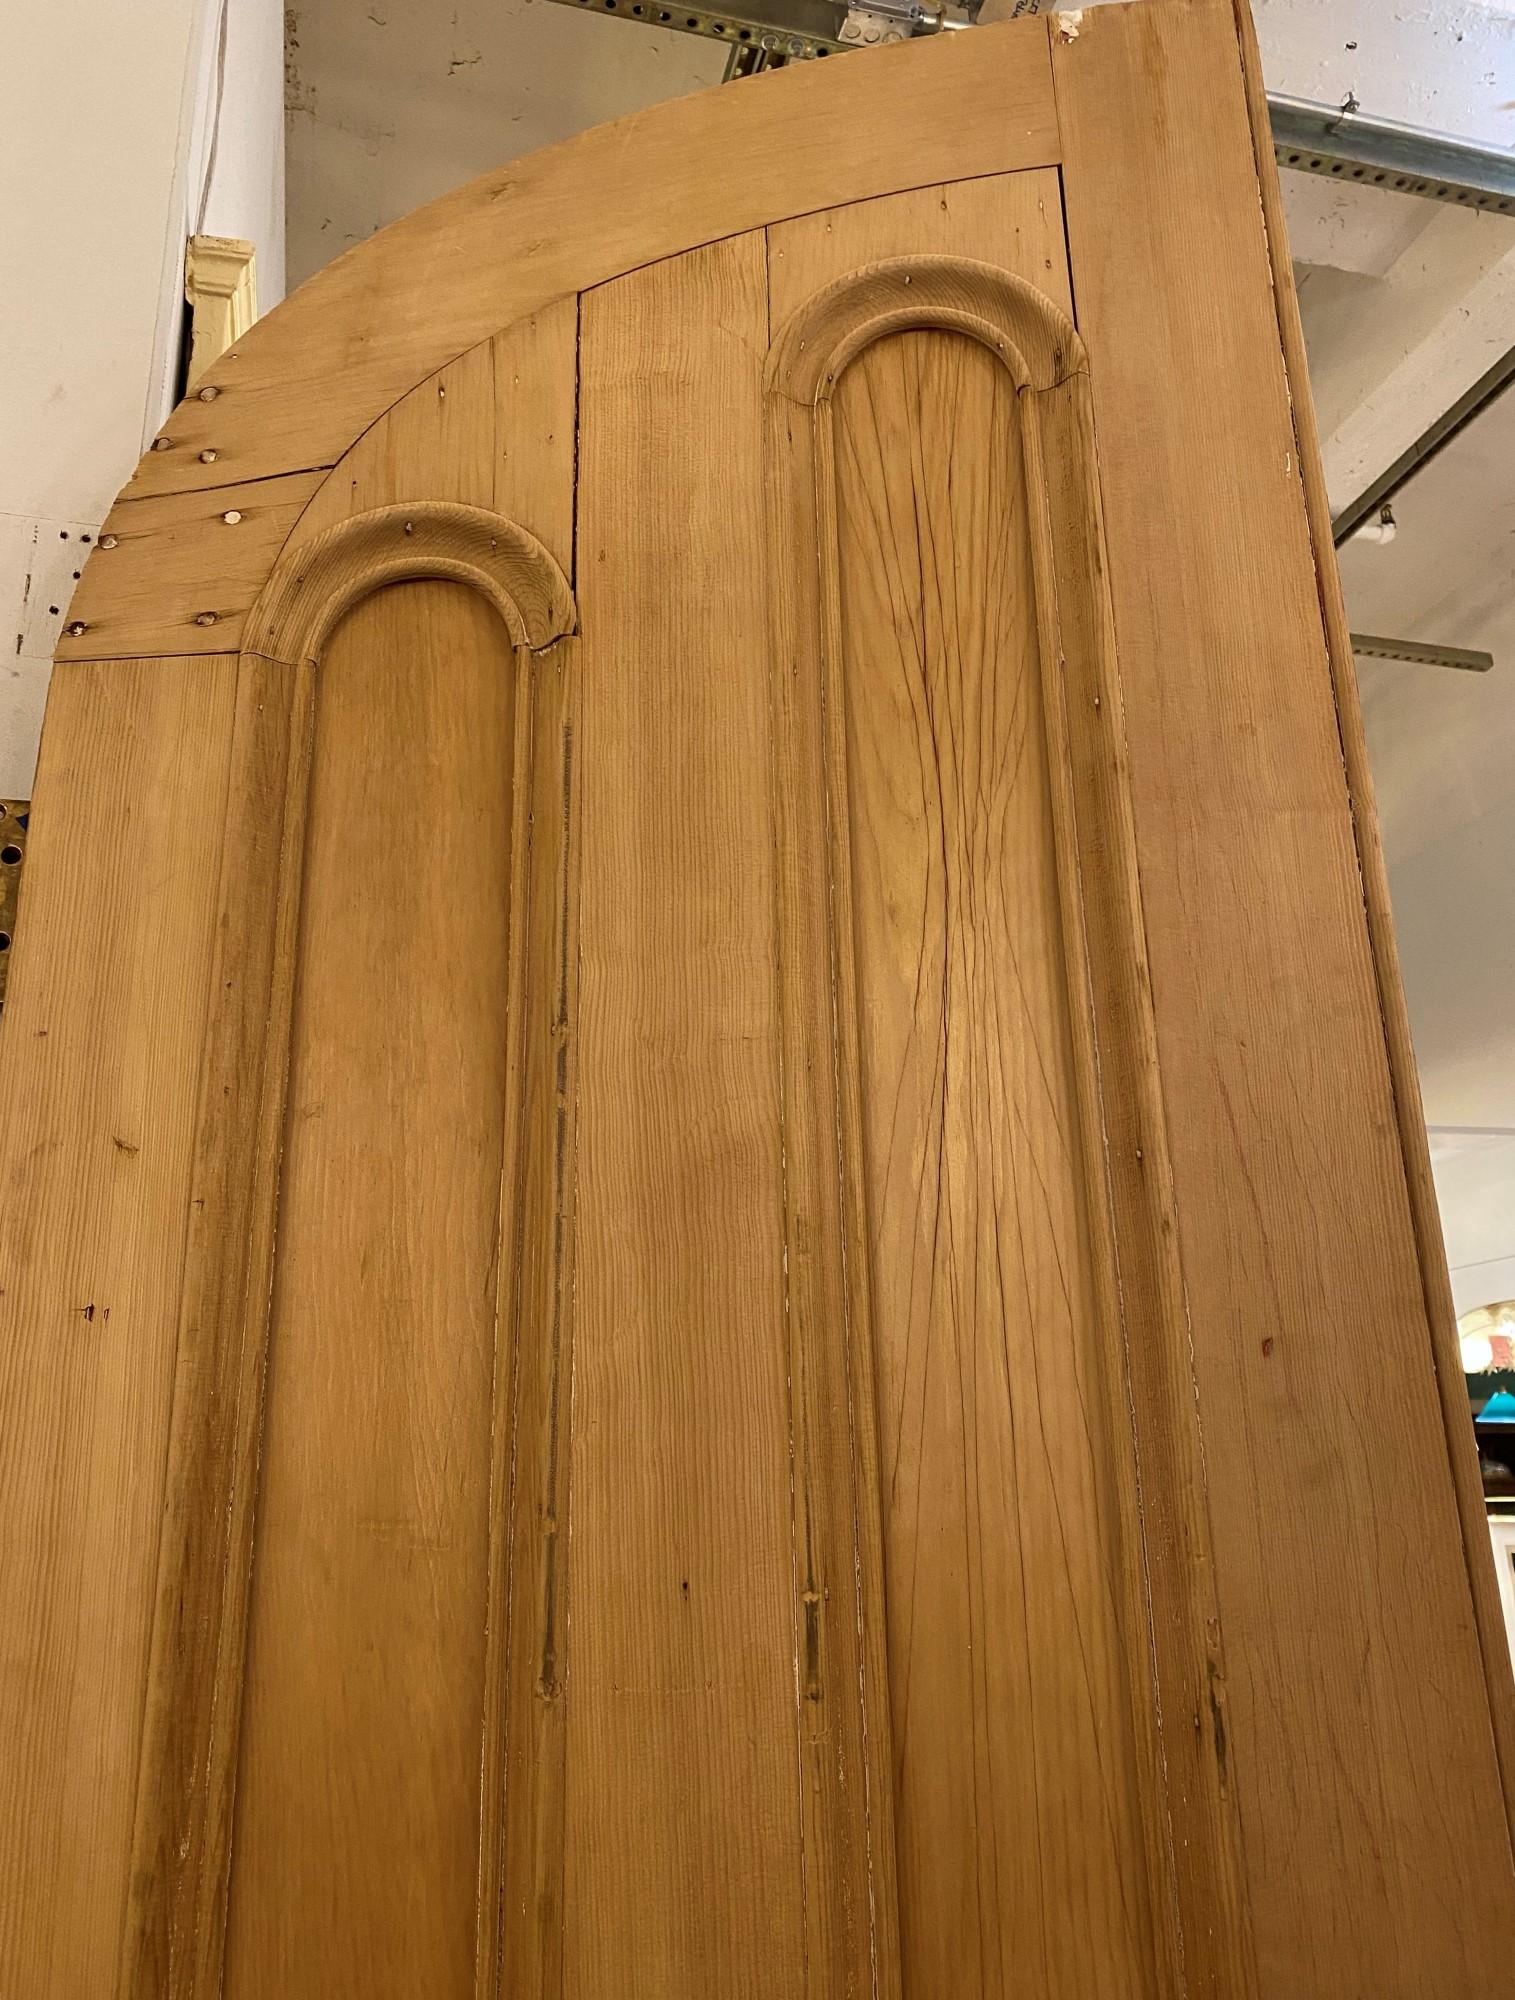 arched doors for sale